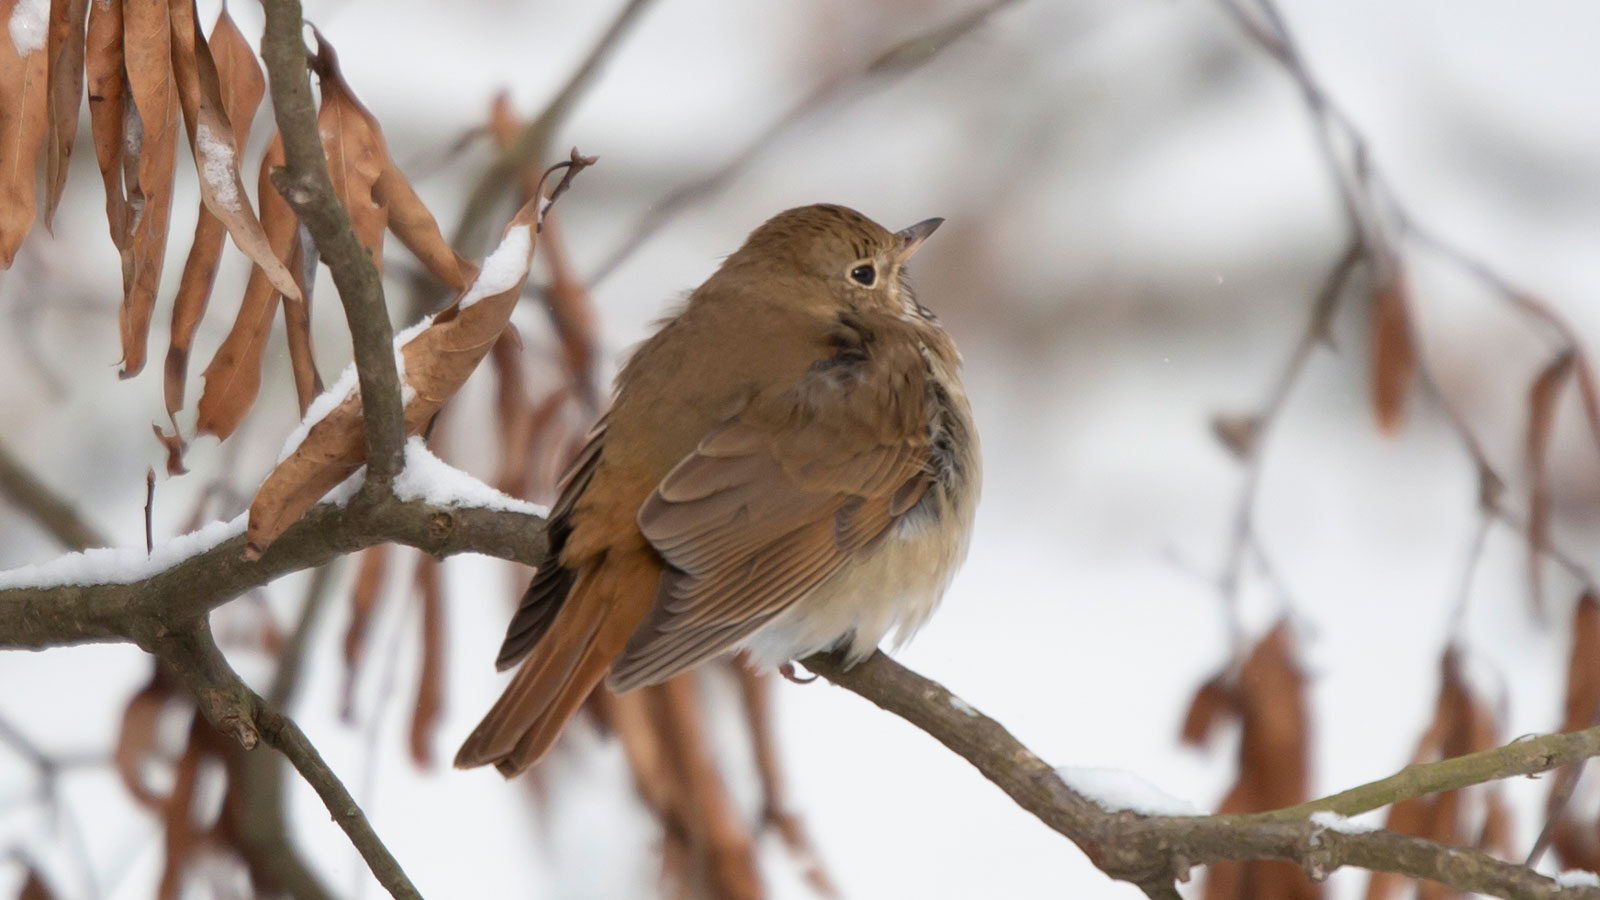 Hermit thrush looking out from its perch on a snow-covered tree branch